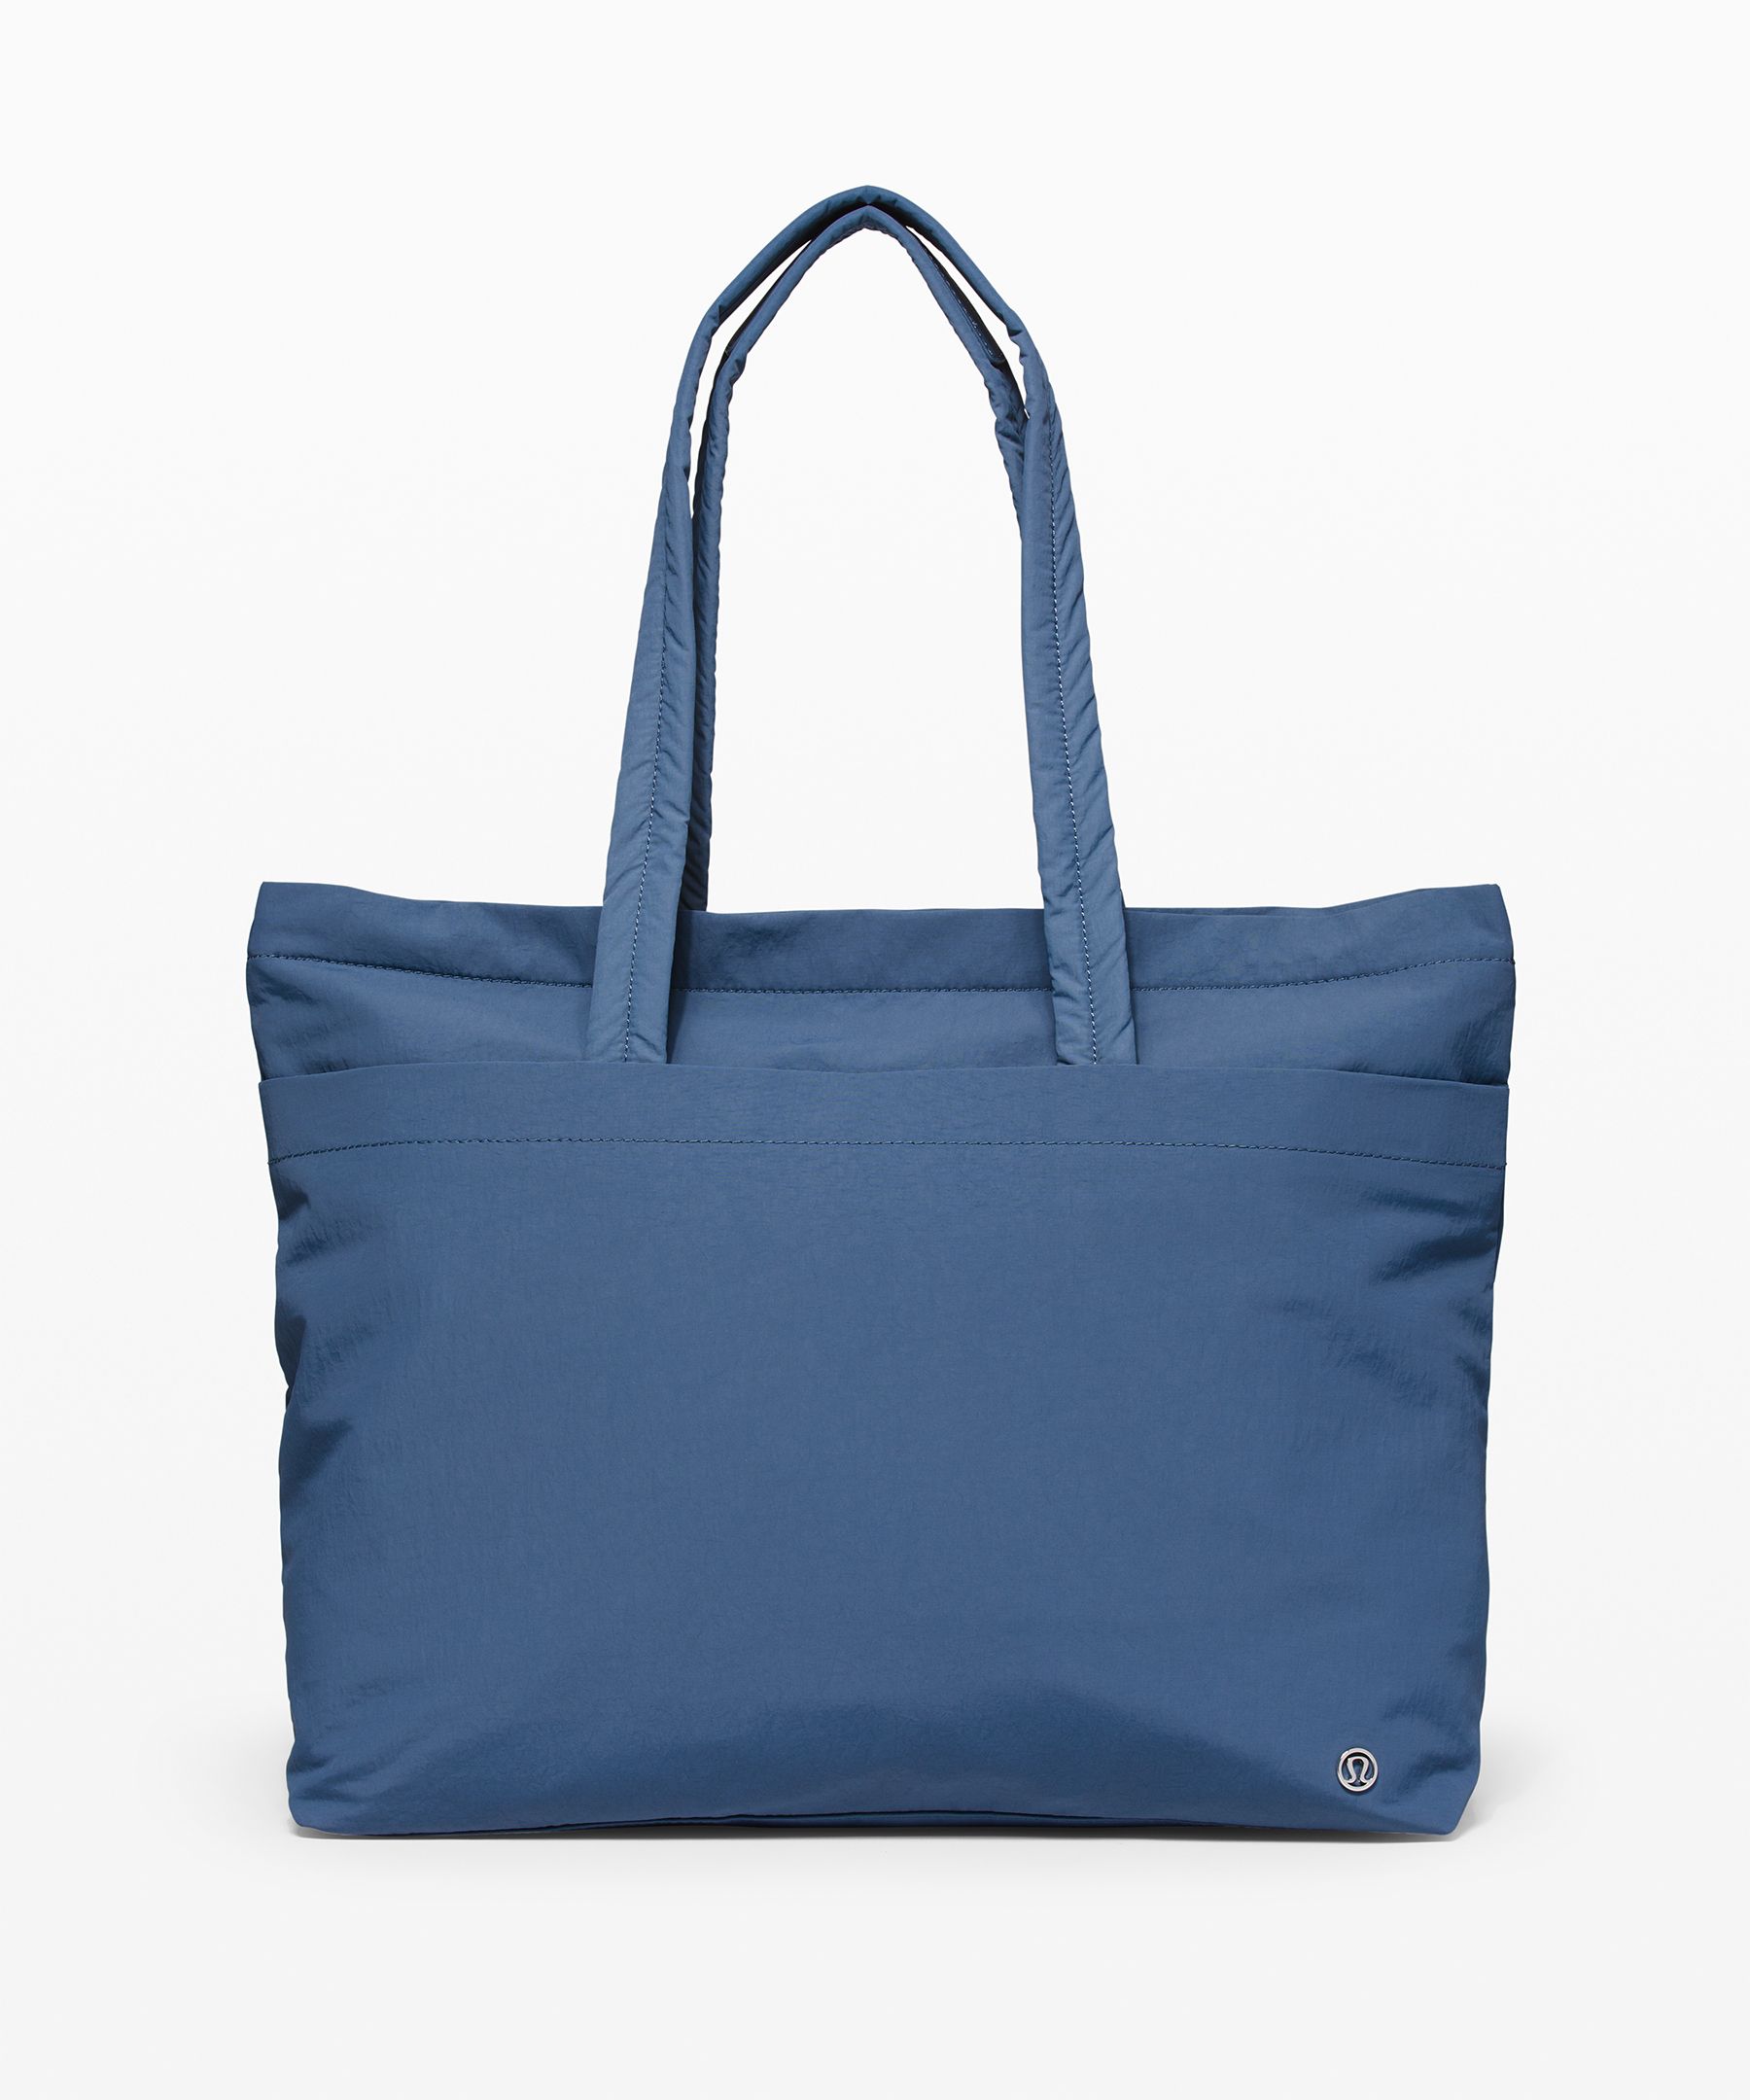 Lululemon On My Level Tote Large *online Only 15l In Code Blue